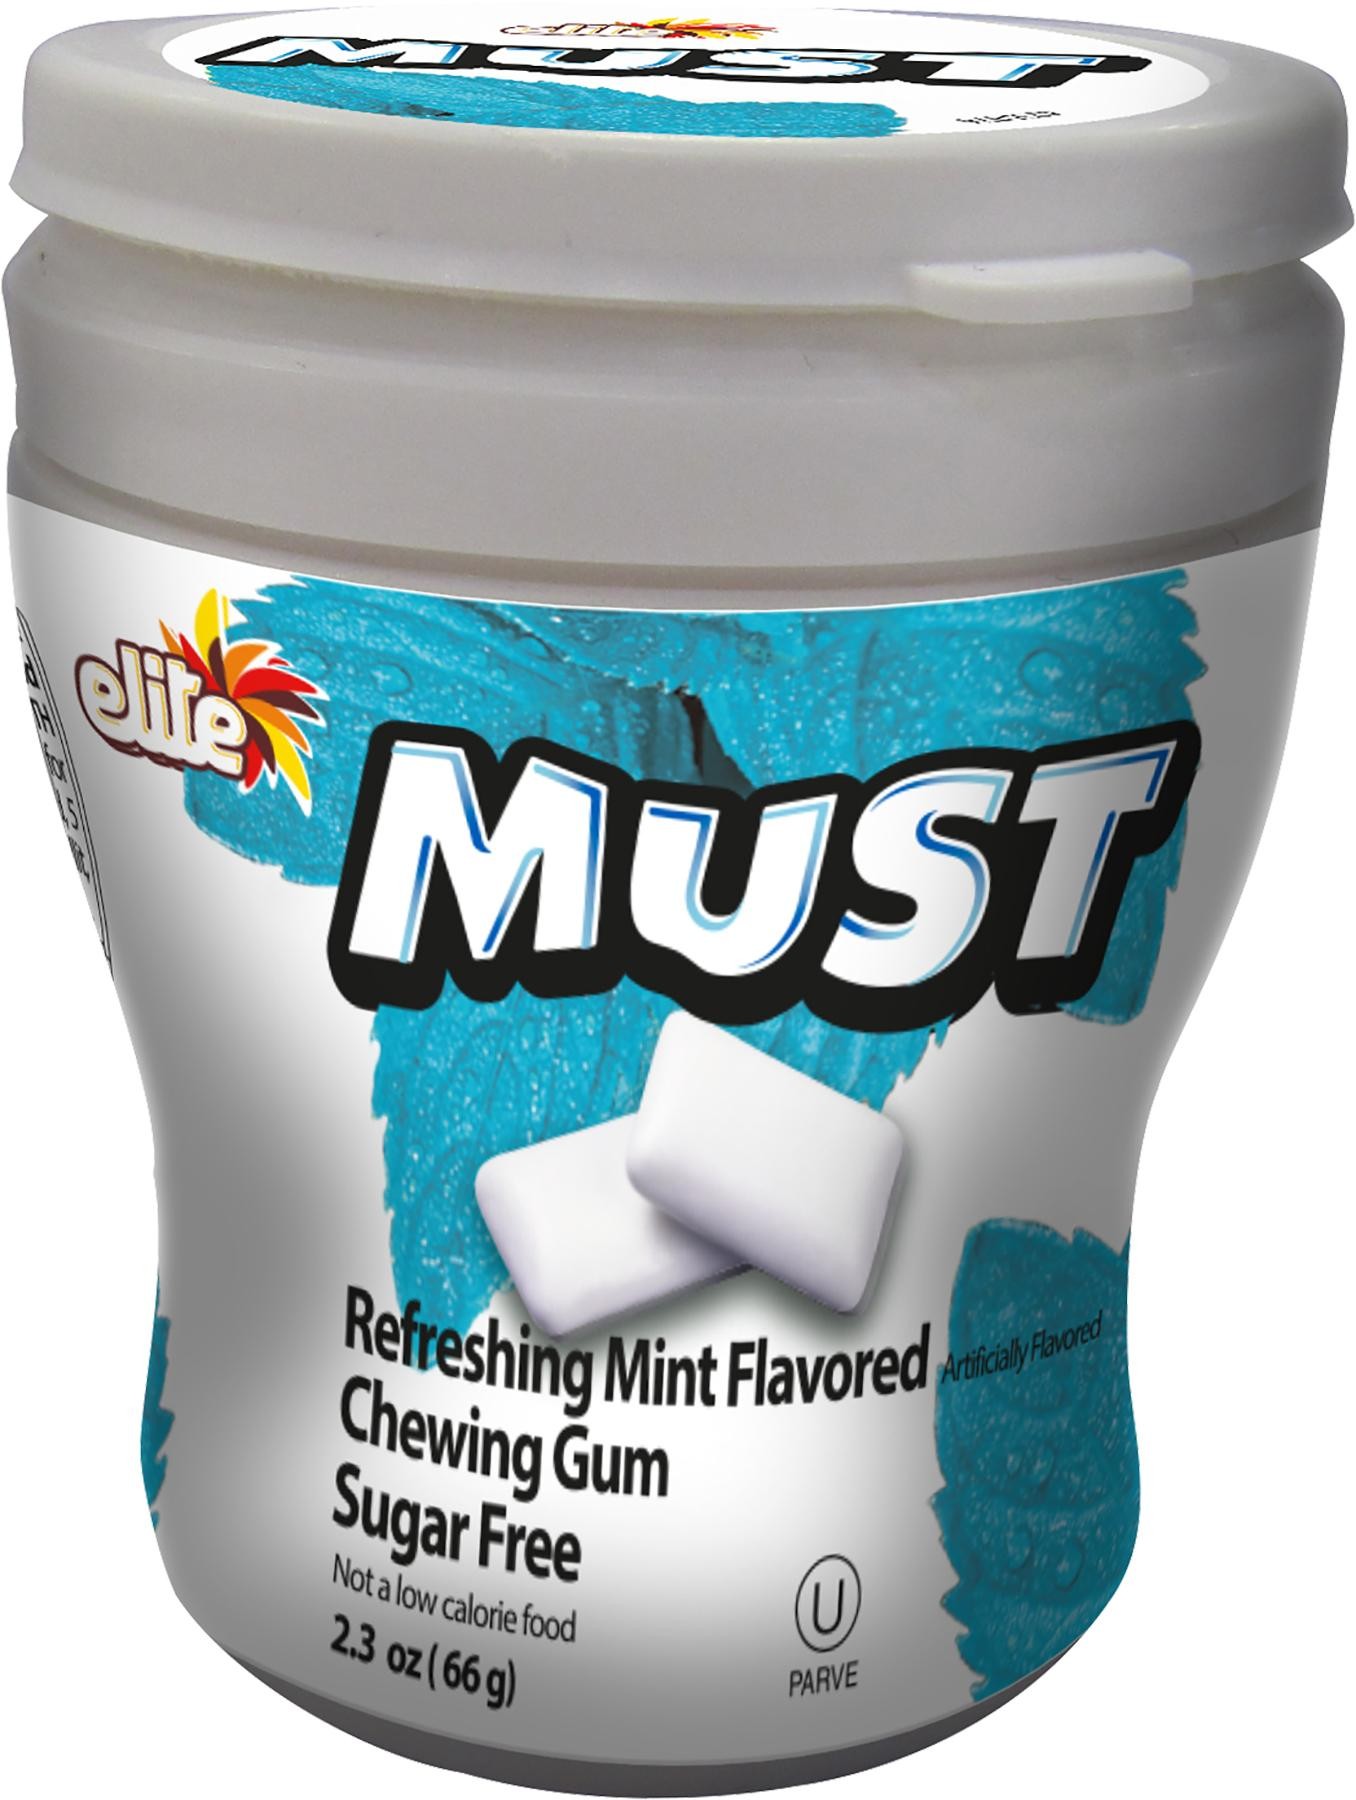 Must Chewing Gum